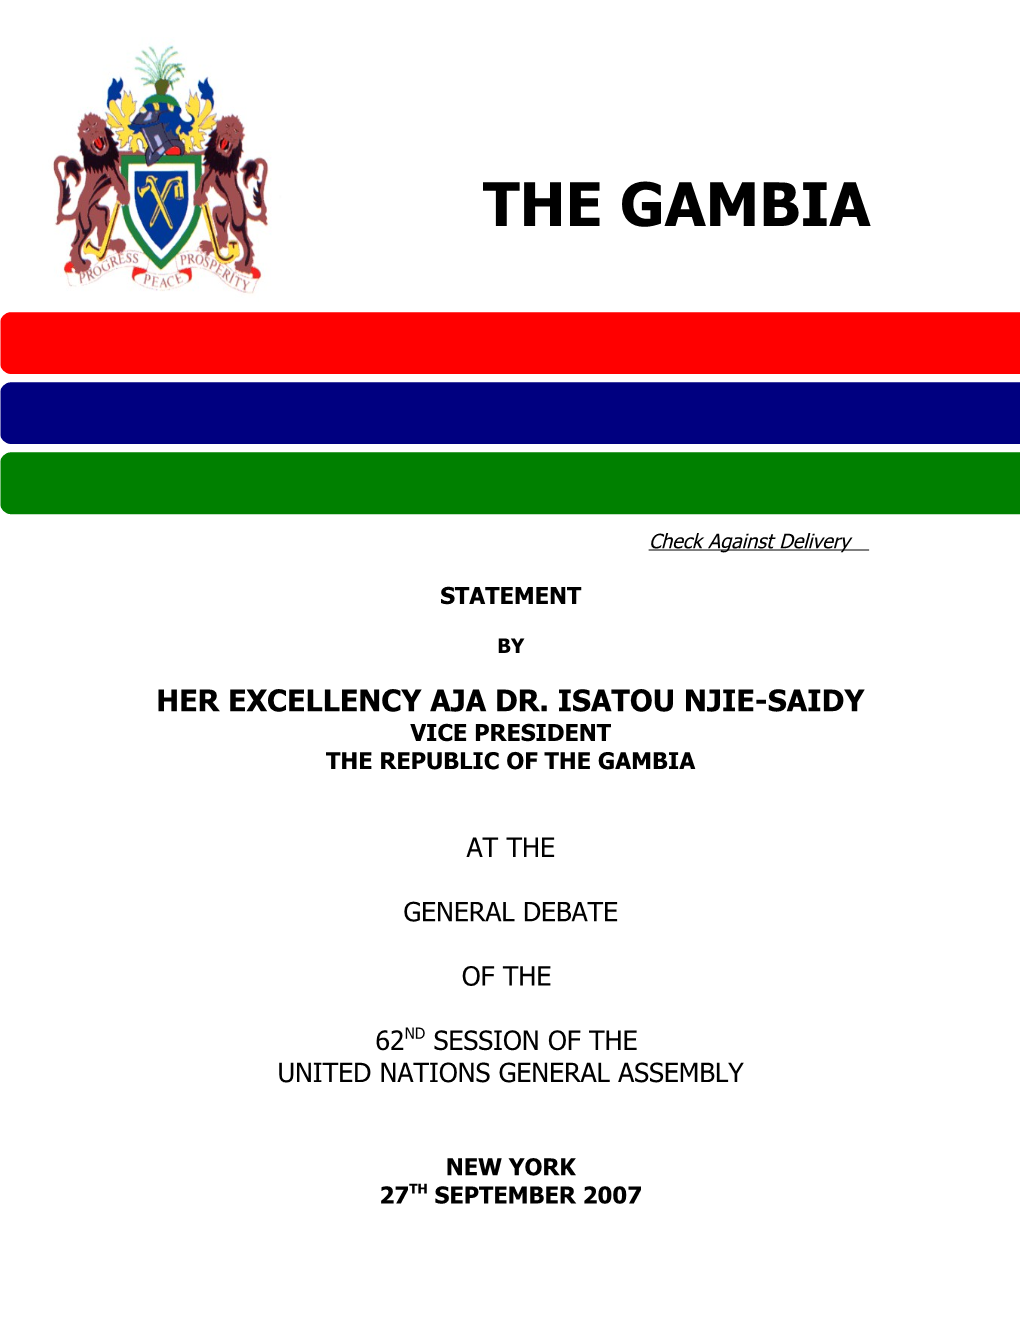 Her Excellency Aja Dr. Isatou Njie-Saidy